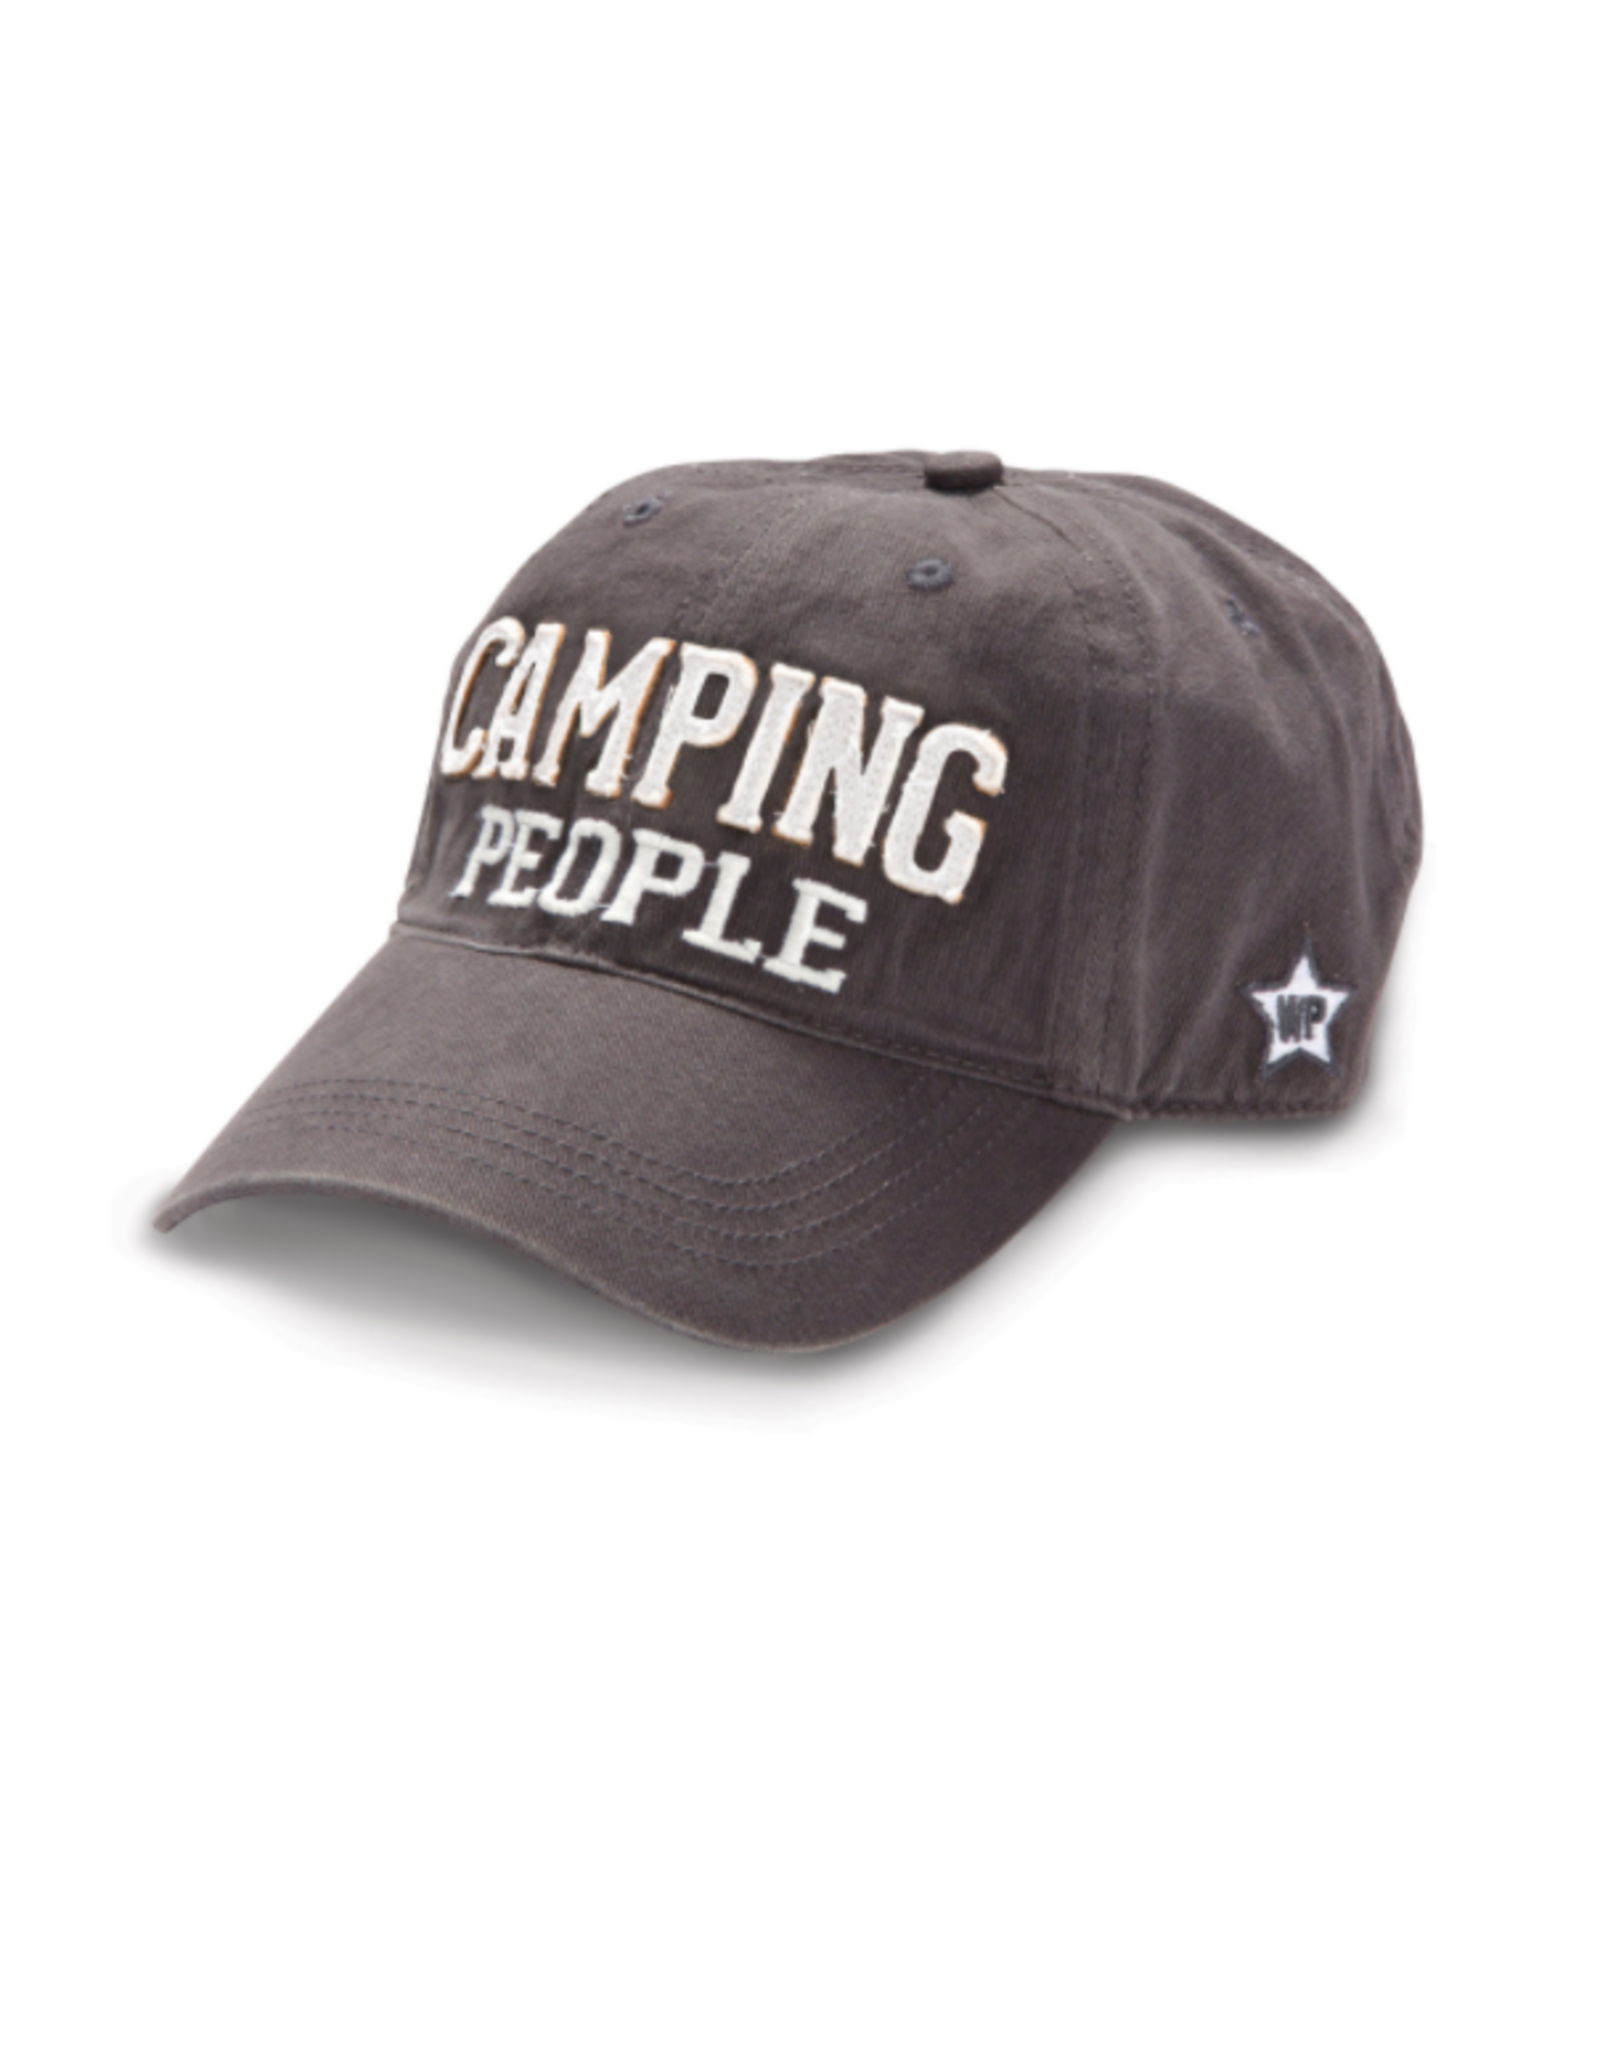 We People Camping People Ball Hat, grey